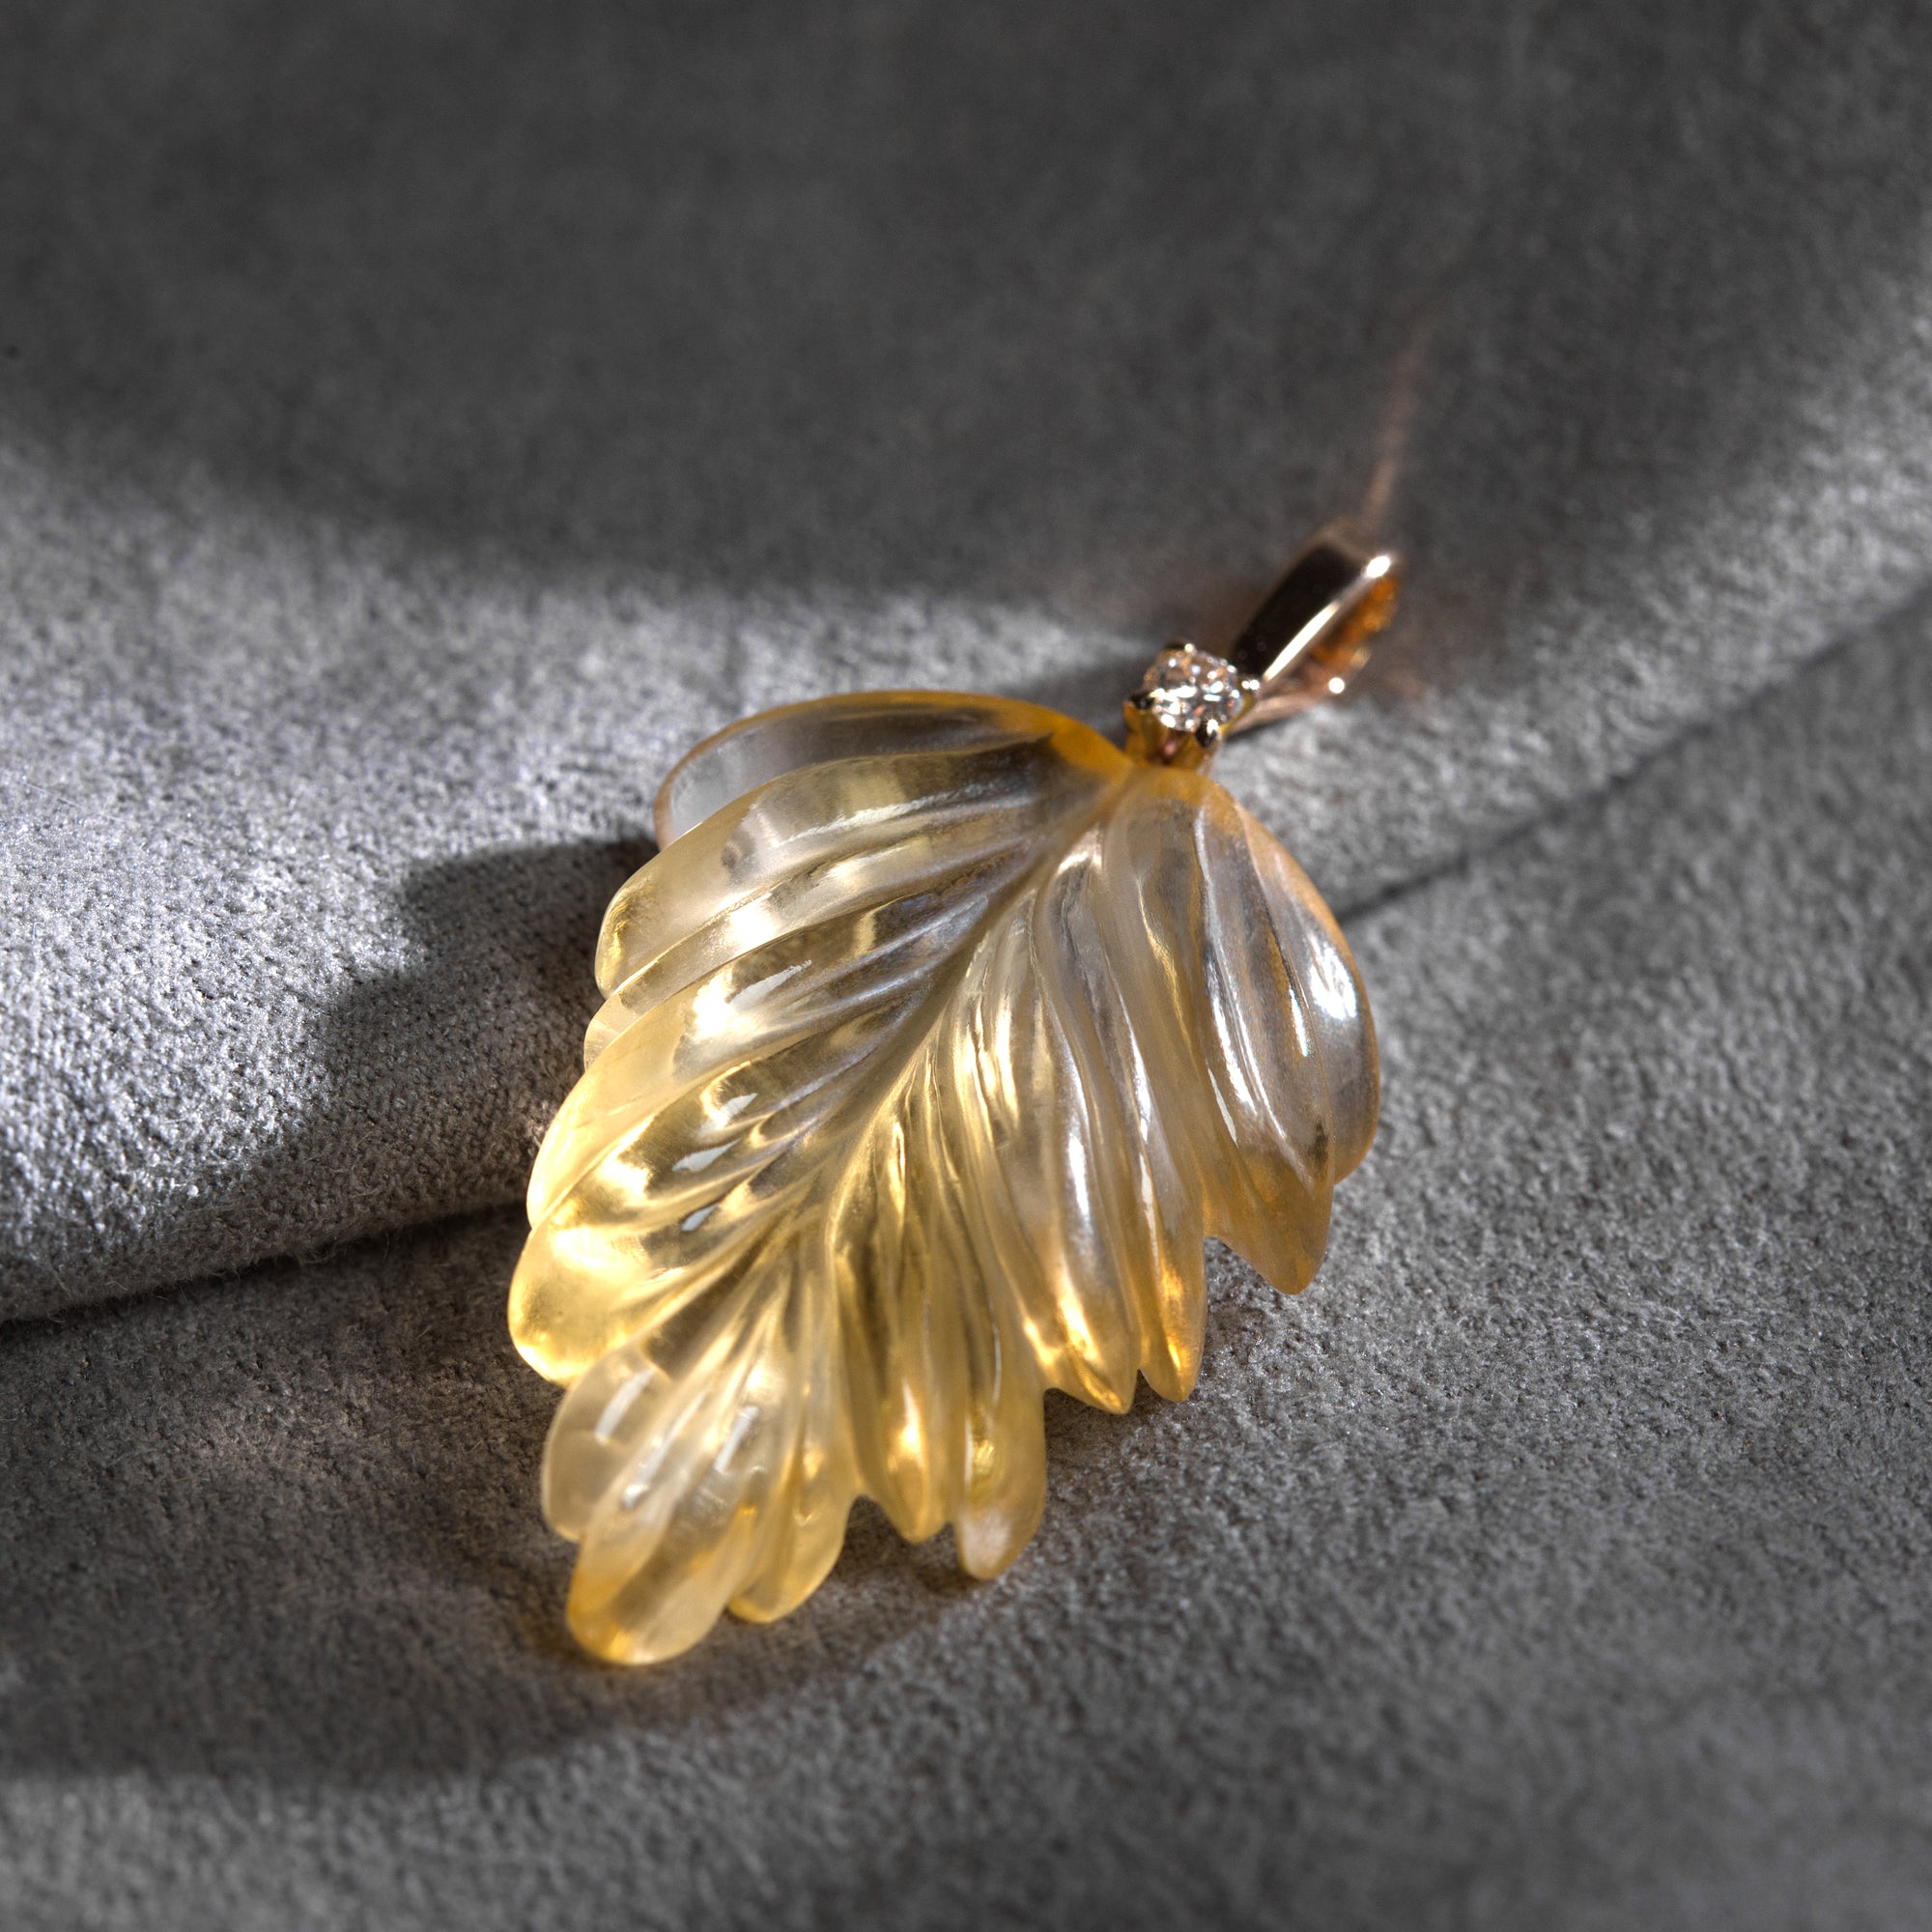 The photo presents hand-carved citrine leaf placed on grey background. The leaf is finished with light brown diamond and 18K gold stem.